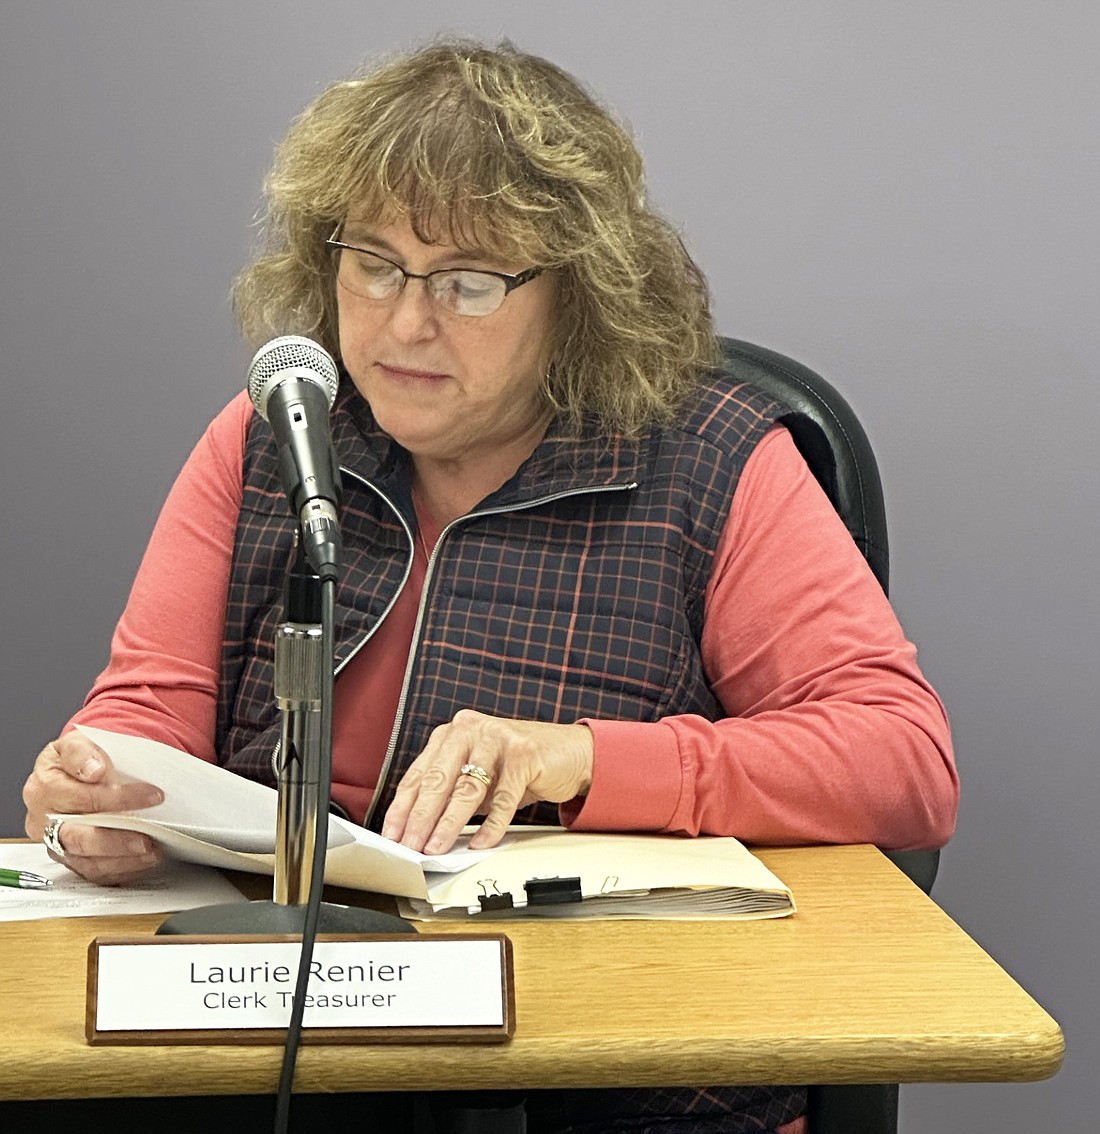 Laurie Renier reads her resignation letter as the Winona Lake clerk-treasurer to the town council Tuesday. Her resignation is effective immediately, and two of her staff members, Cindy Justice and Teena Pence, announced their resignations were effective immediately, too. Photo by David Slone, Times-Union